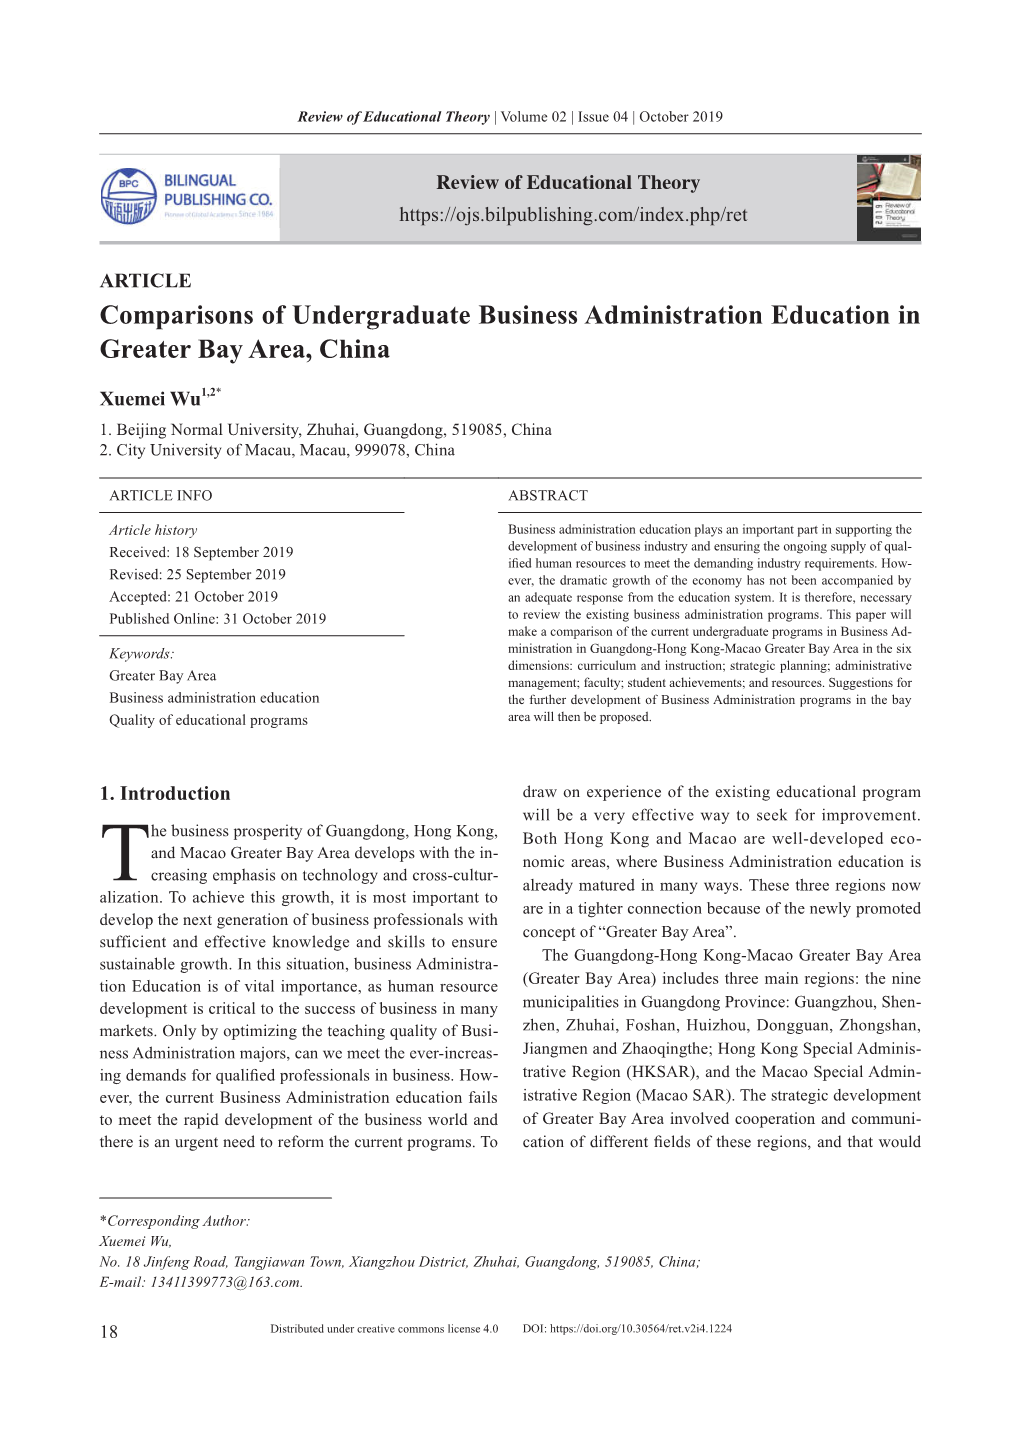 Comparisons of Undergraduate Business Administration Education in Greater Bay Area, China